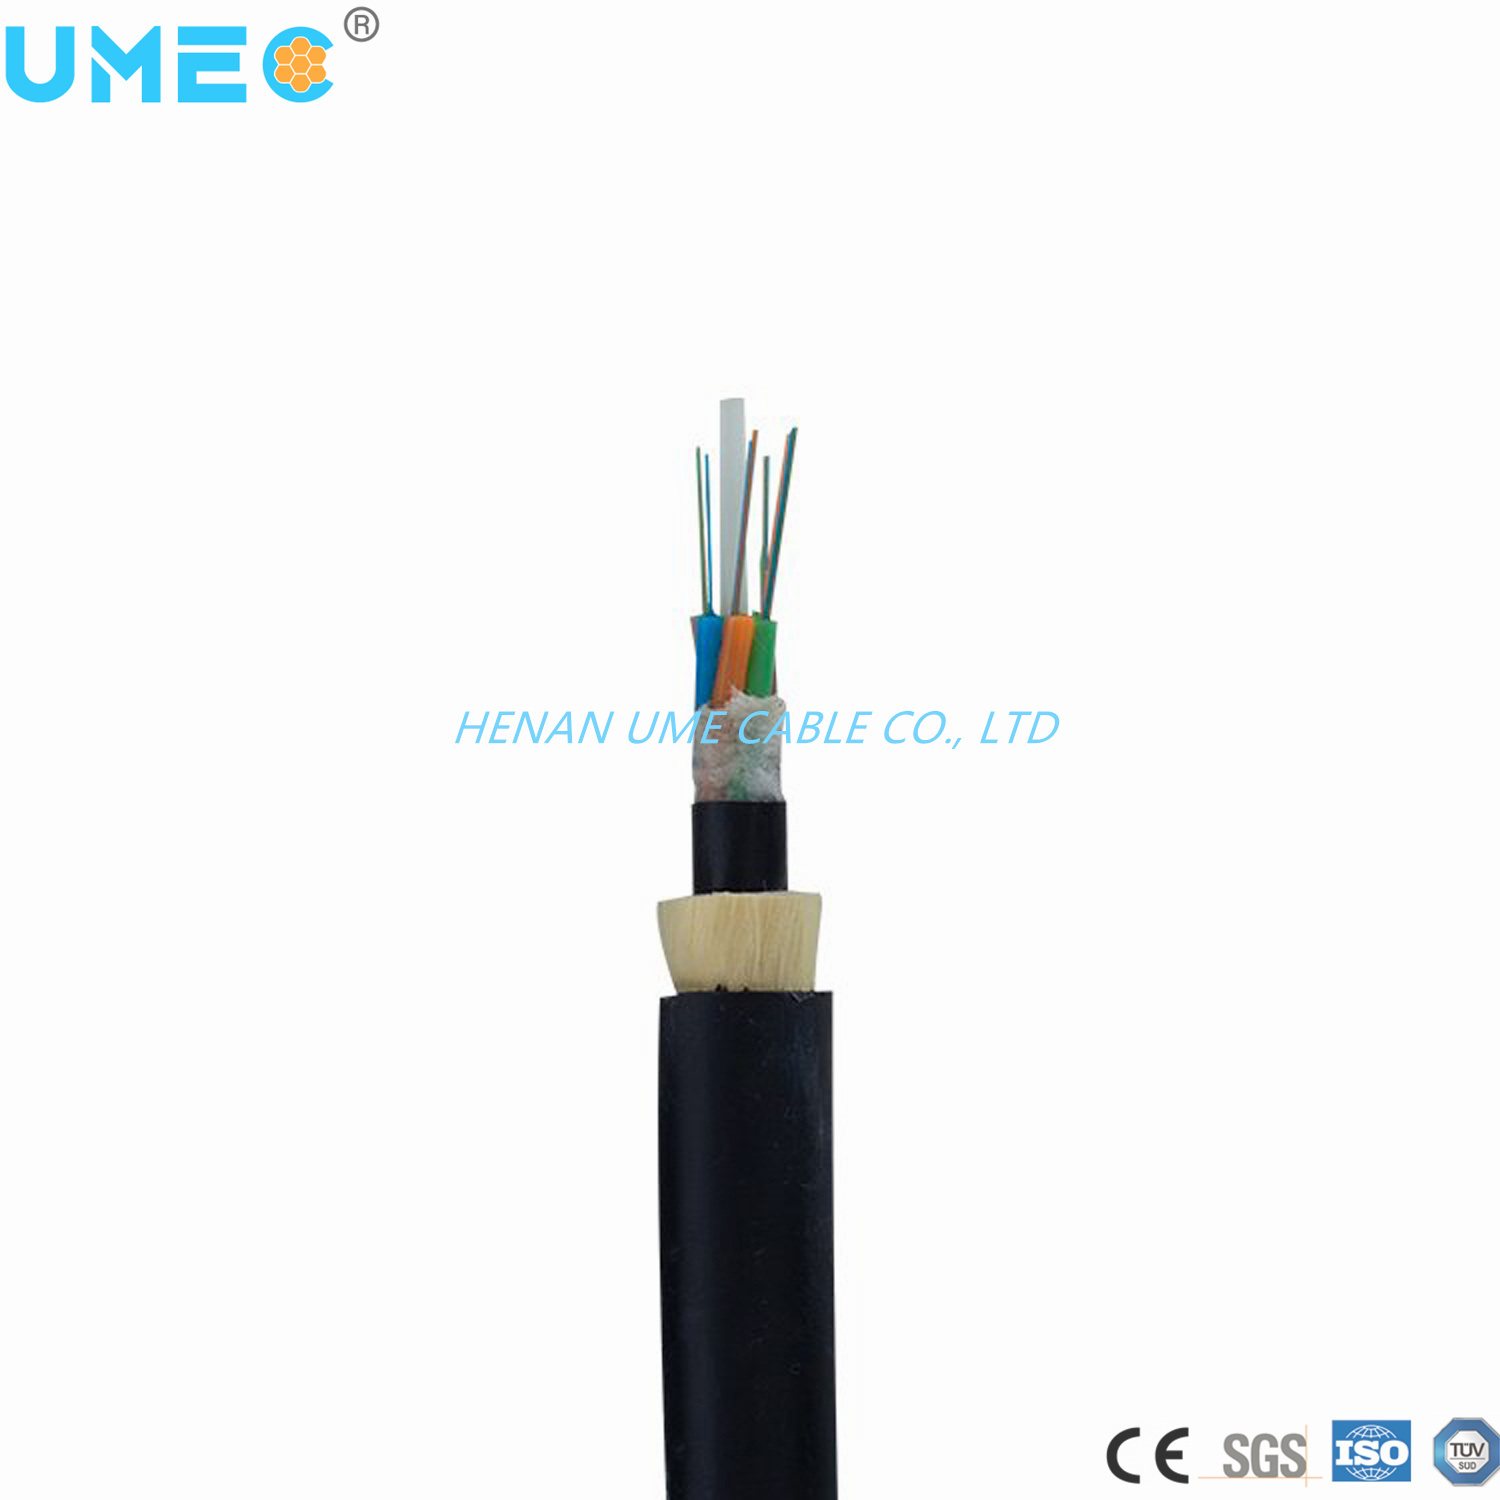 All Dielectric Self Supported ADSS Fiber Optic Cables